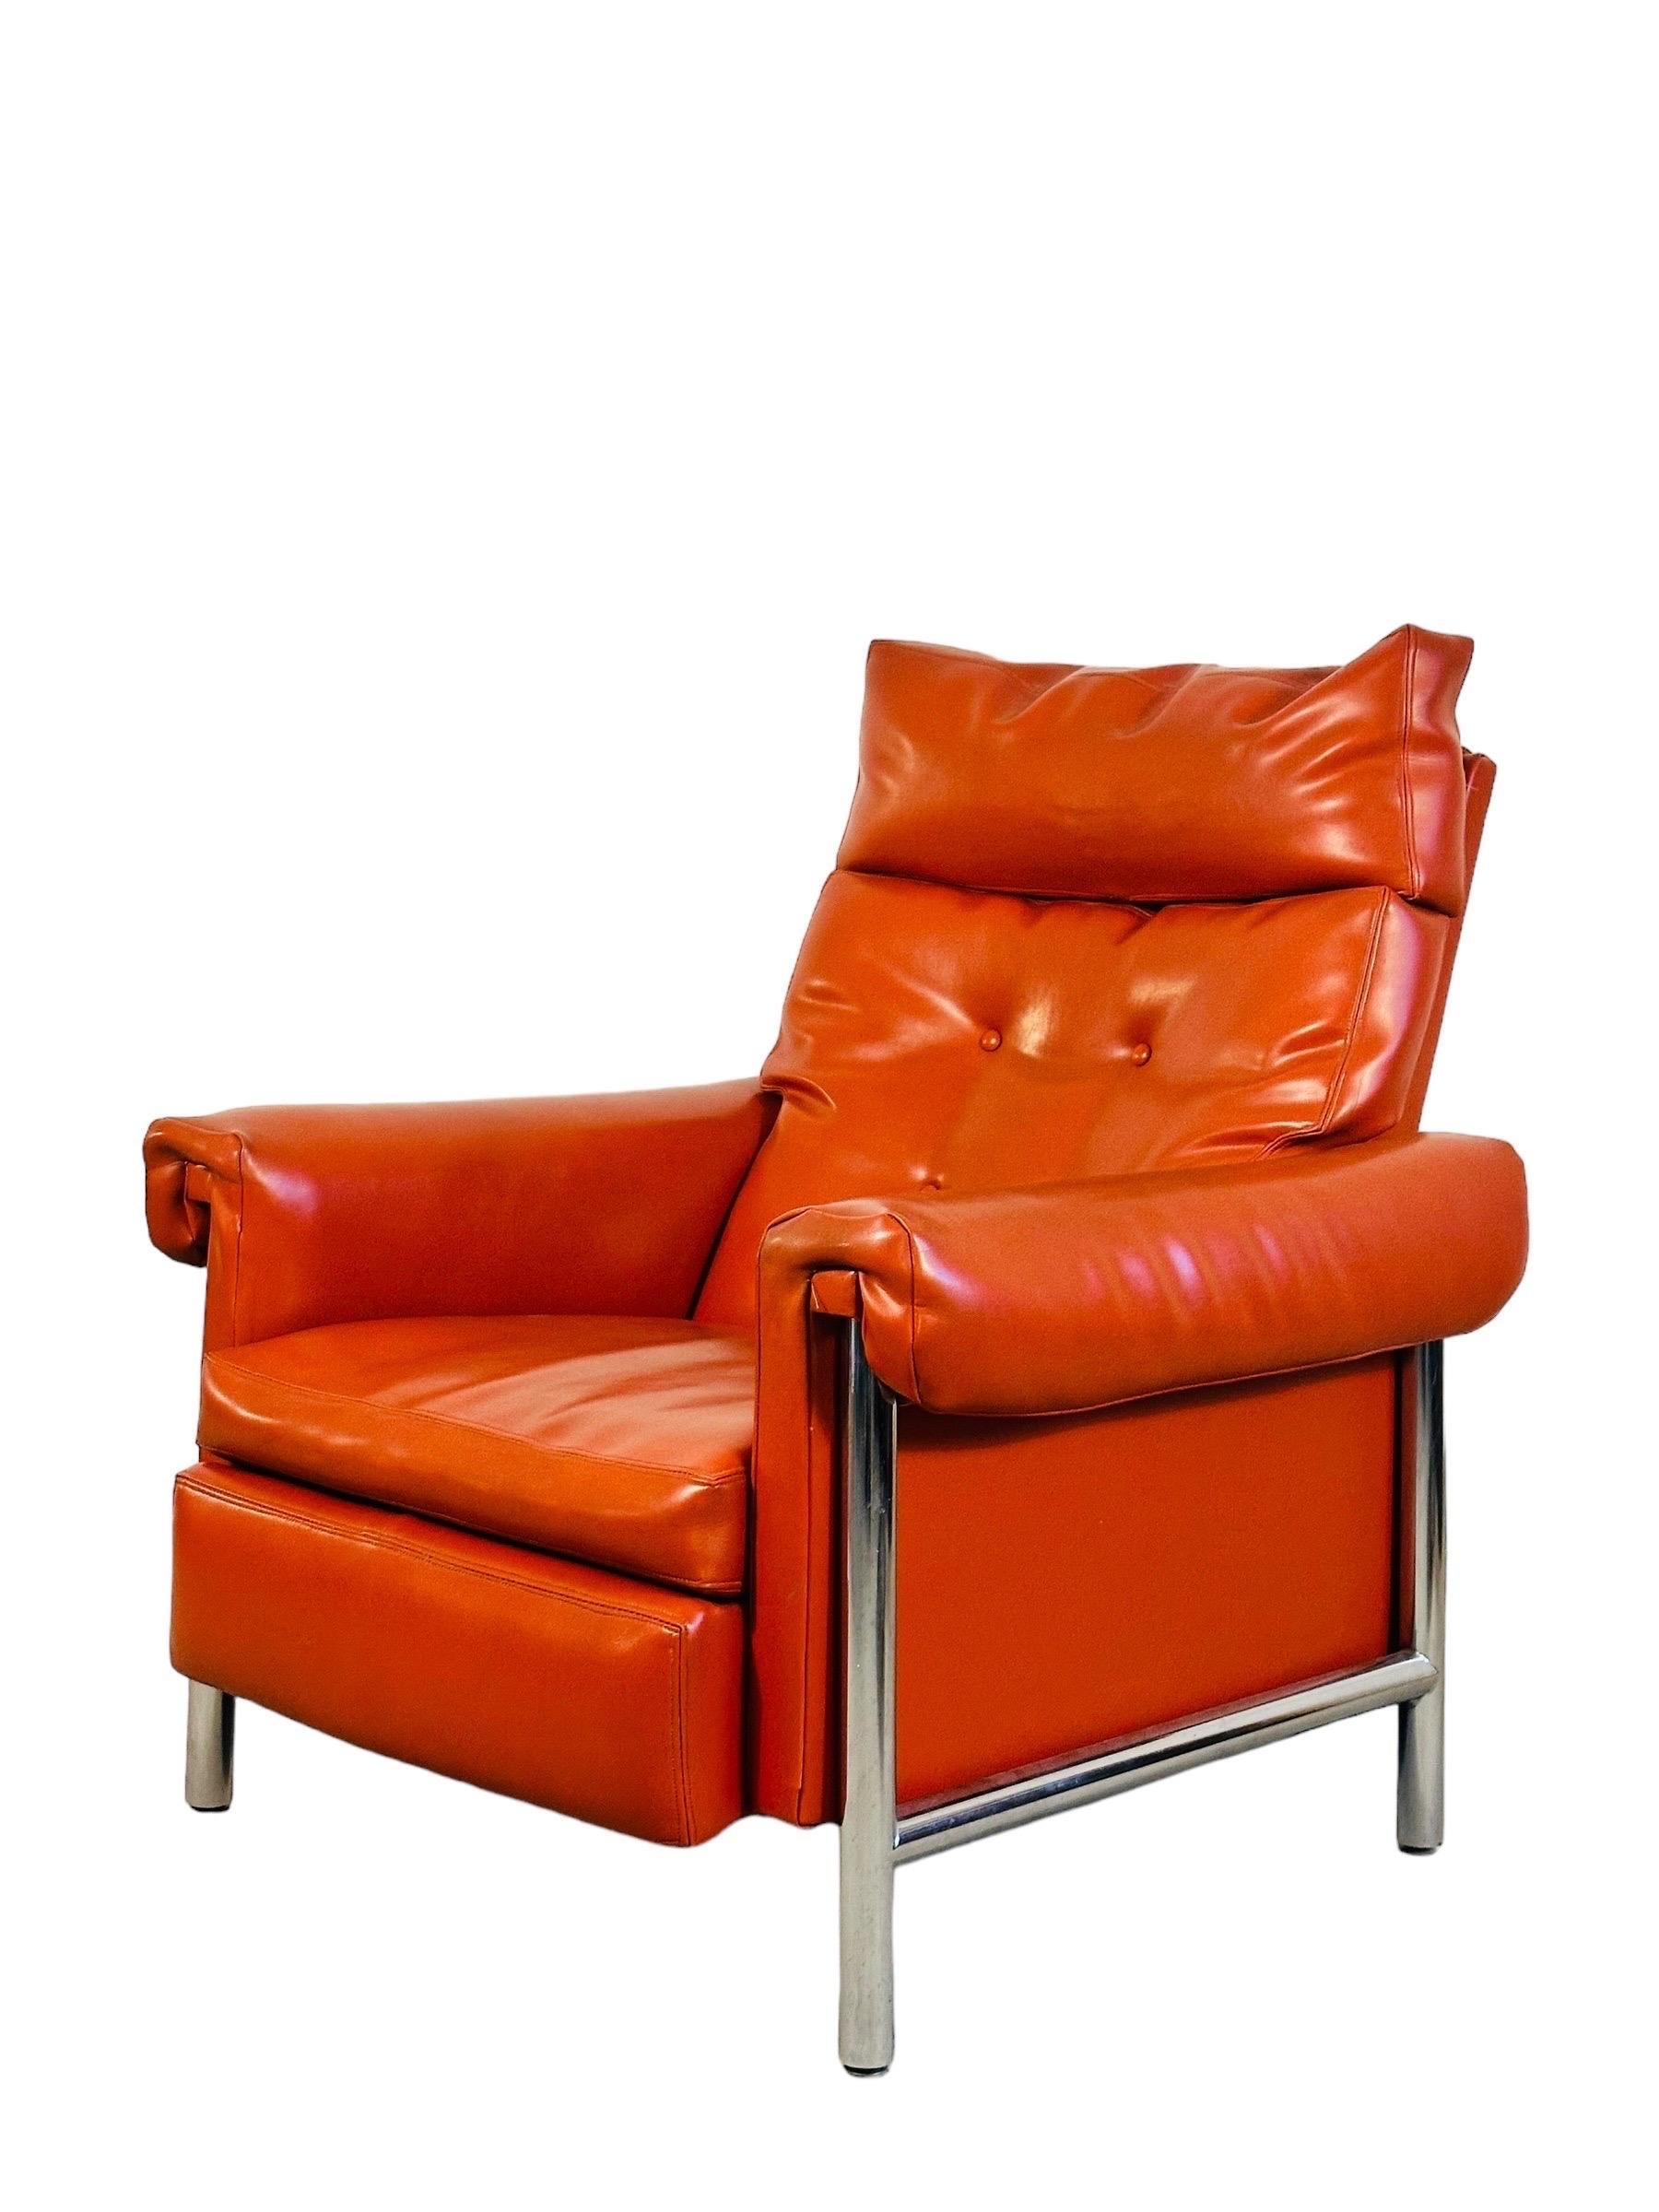 For this striking mid-century recliner lounge chair, bask in the bold, beautiful simplicity of a bygone era. This piece features a polished chrome frame that contrasts perfectly with the rich orange leather, giving it a vibrant yet sophisticated